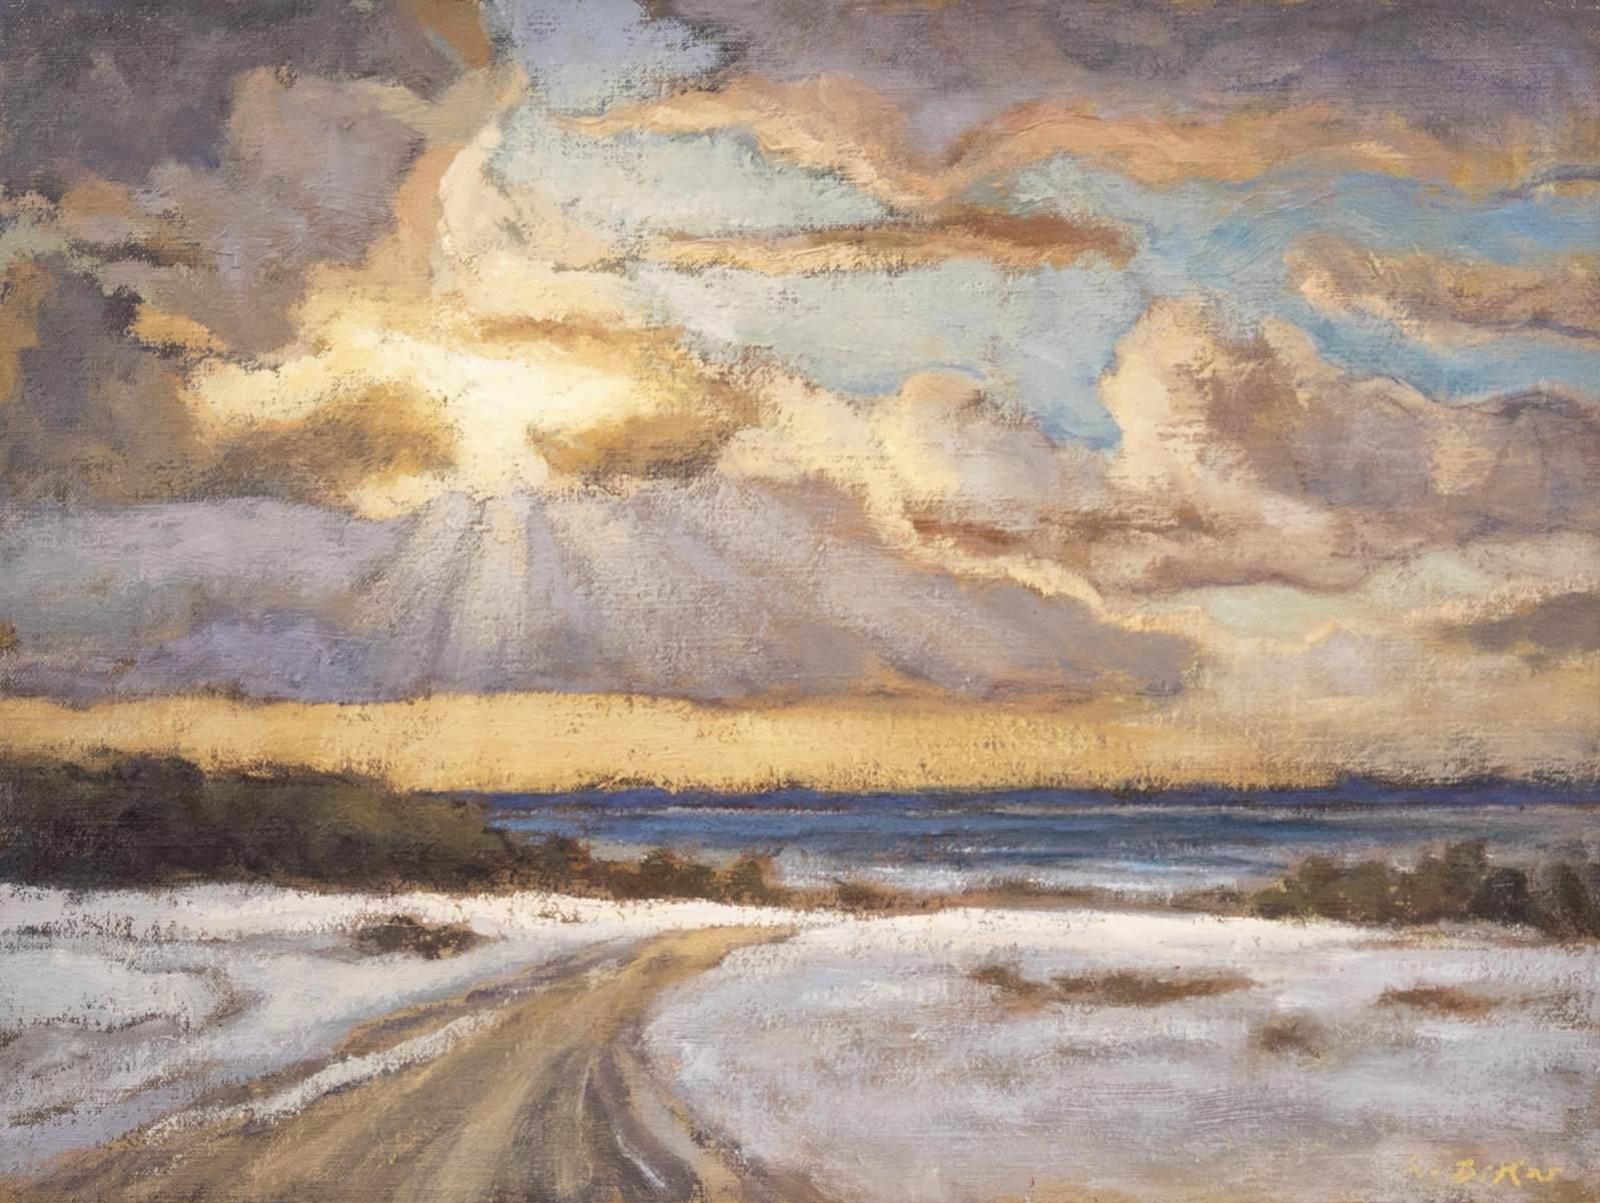 Antoine Bittar (1957) - Clouds Above The Ottawa River; 2004